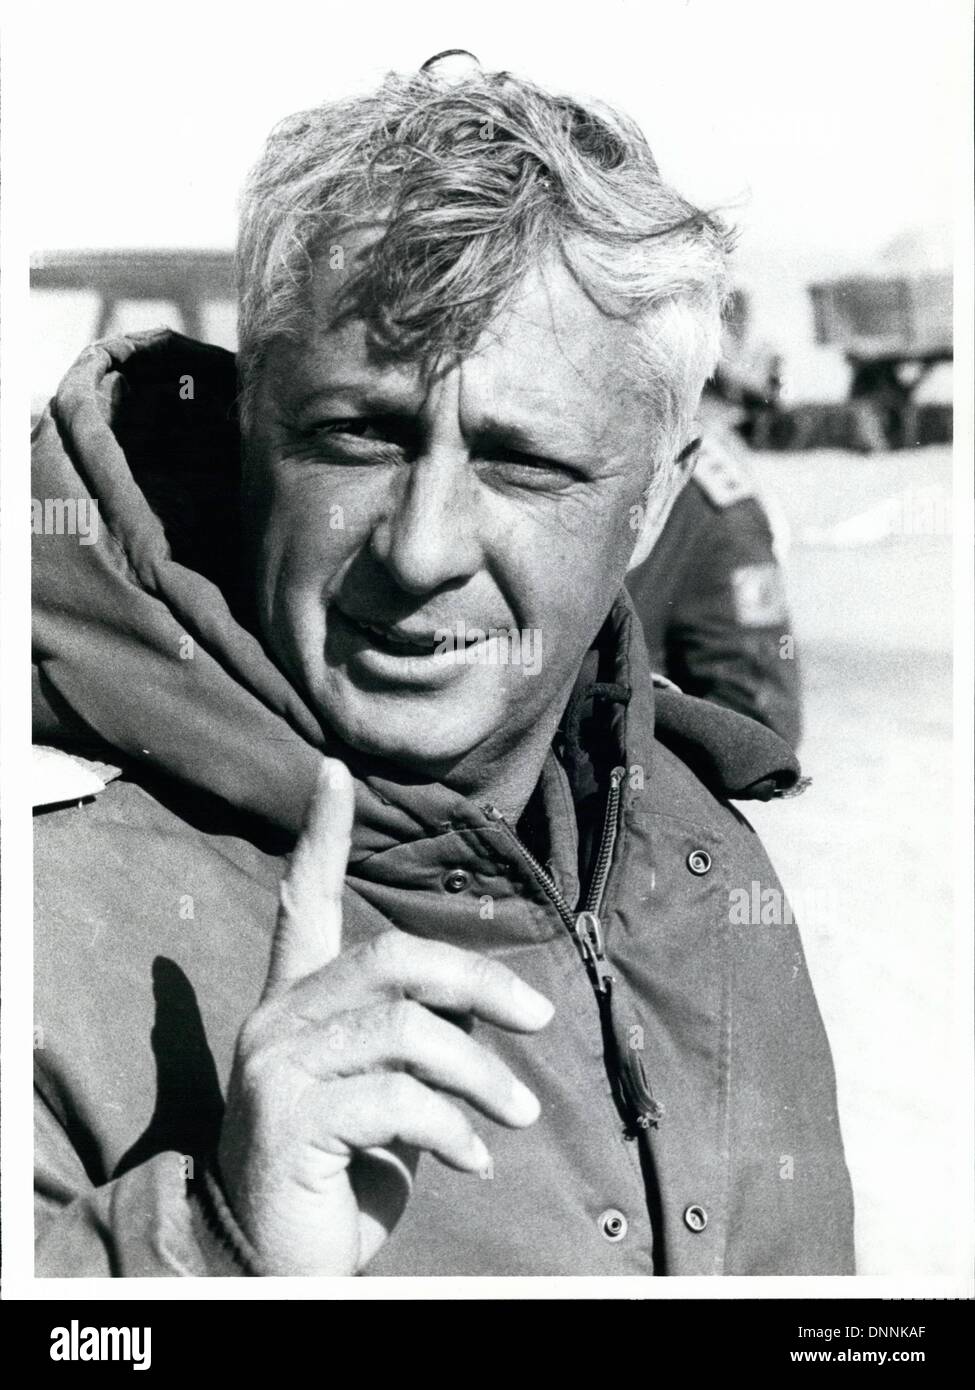 Jerusalem, Israel. 2nd Jan, 2014. Former Prime Minister Ariel Sharon, comatose since a 2006 stroke, slipped closer to death on Thursday with his 'vital organs' failing and a sharp decline in his condition, according to hospital officials. PICTURED: Oct. 1973 - Gen. ARIEL SHARON of Israel. © Keystone Pictures USA/ZUMAPRESS.com/Alamy Live News Stock Photo